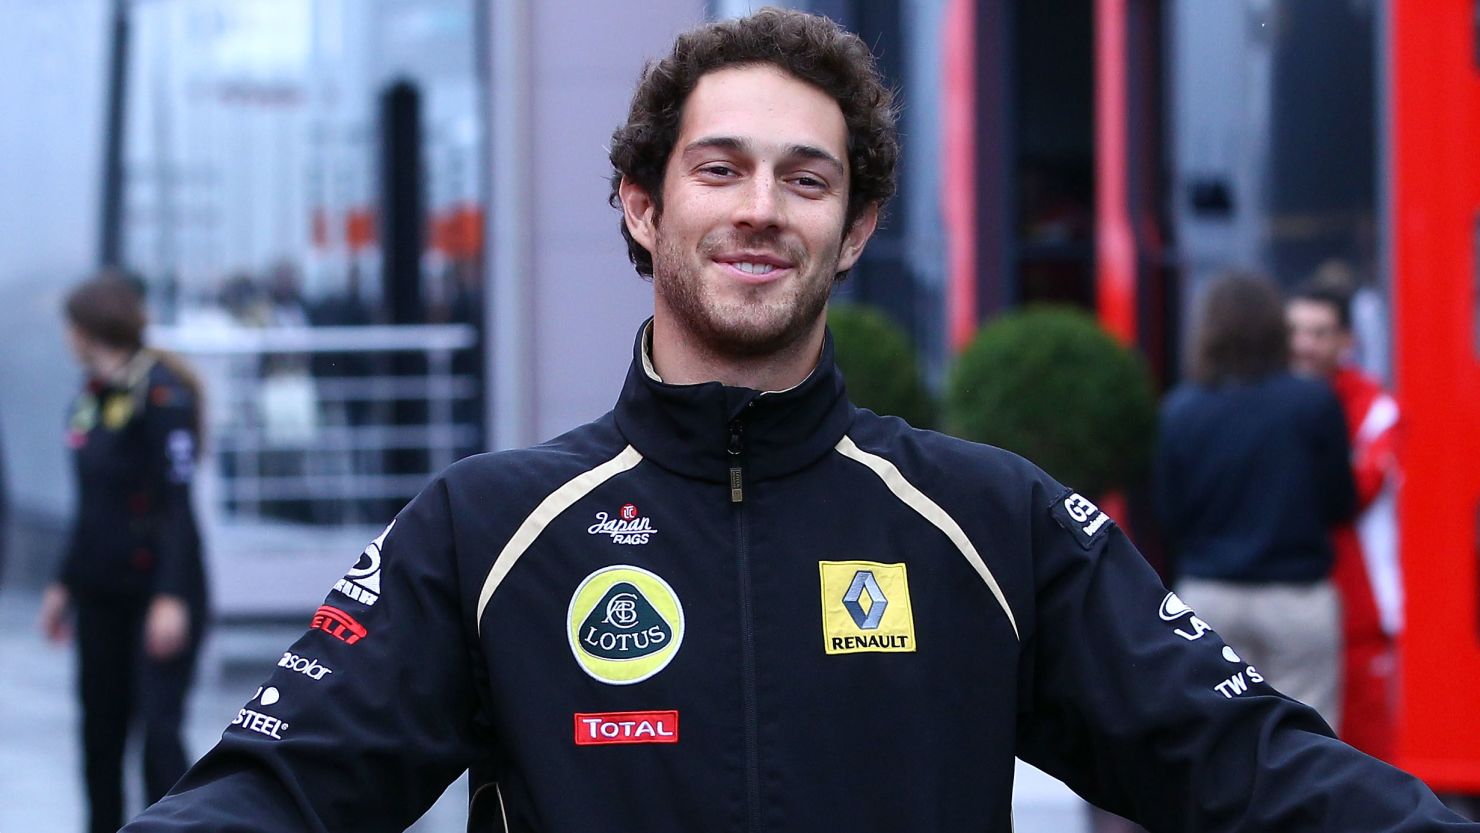 Bruno Senna is the nephew of Ayrton Senna, the three-time world champion who died in 1994.